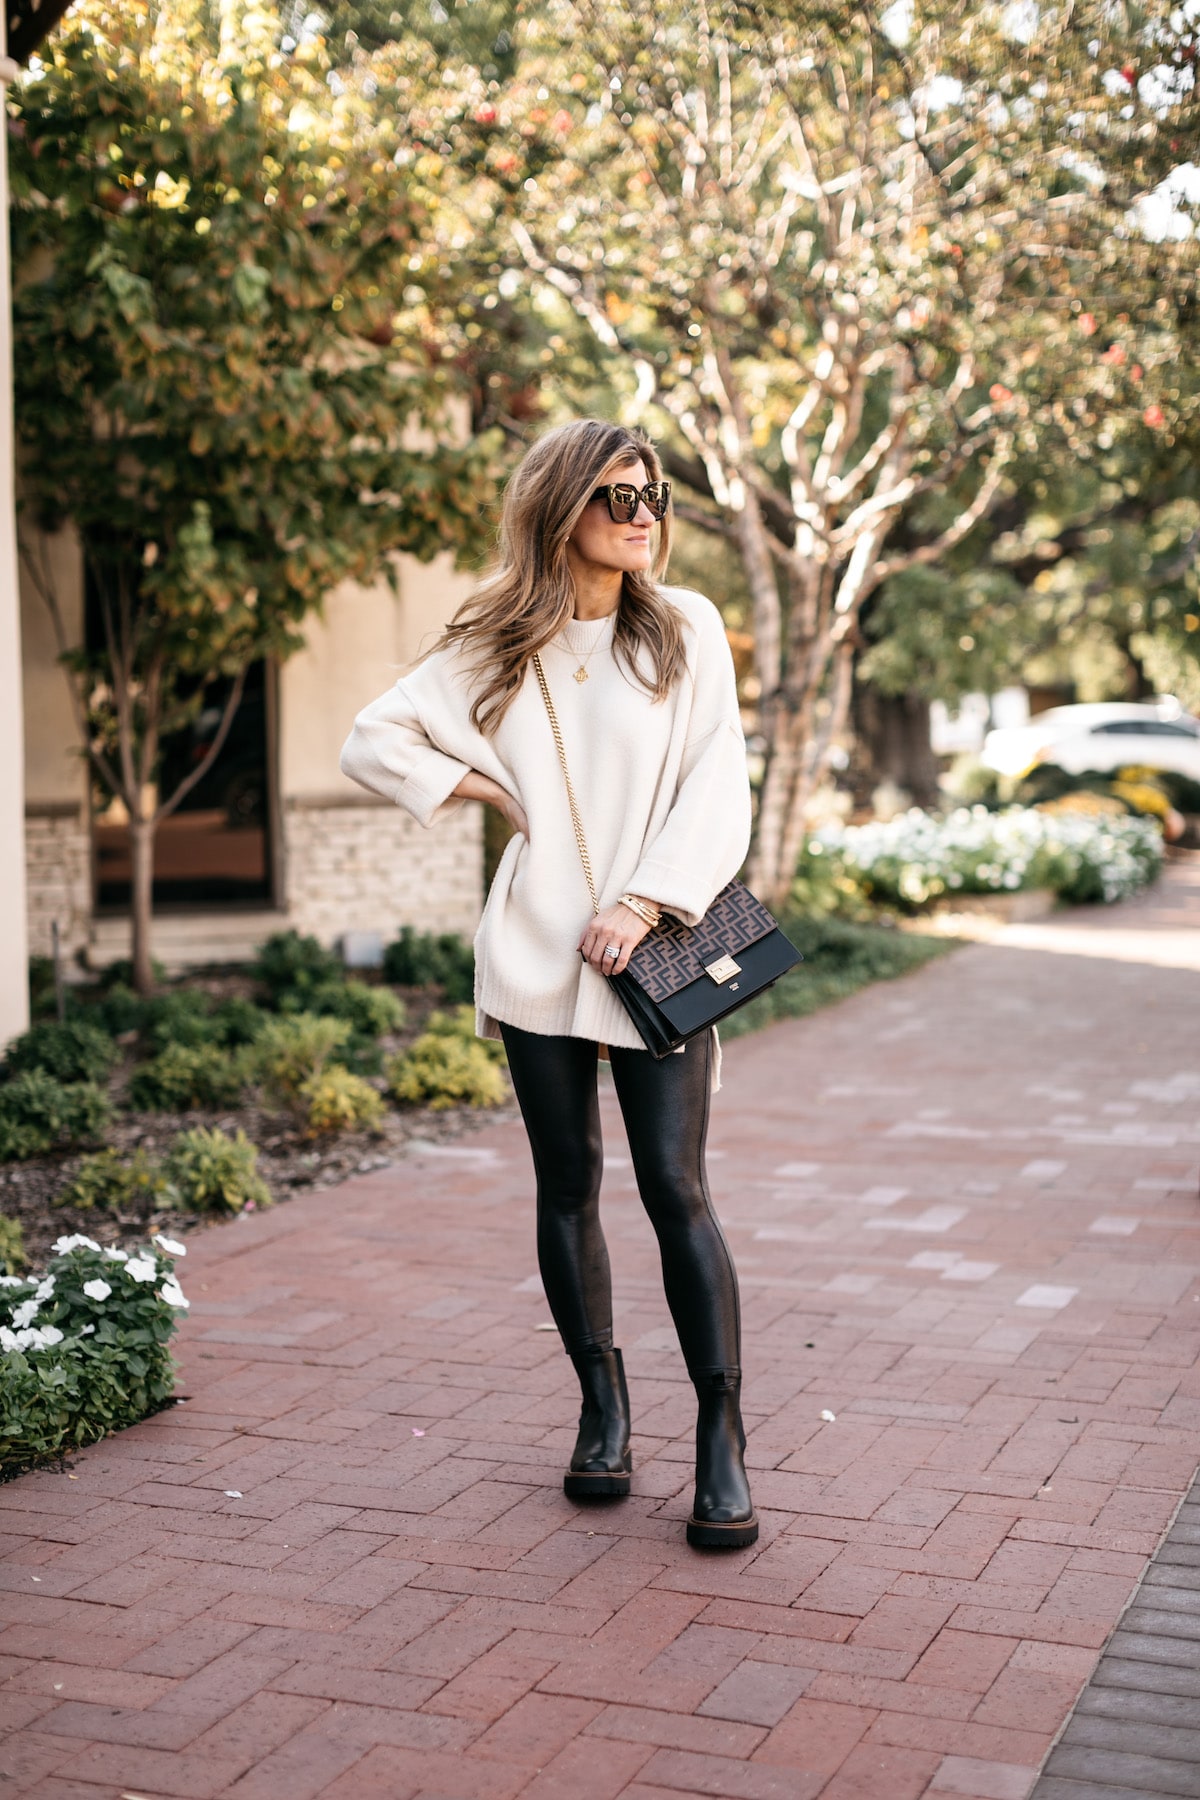 A COMFY AND CHIC LOOK WITH FAUX LEATHER LEGGINGS, CHIC TALK